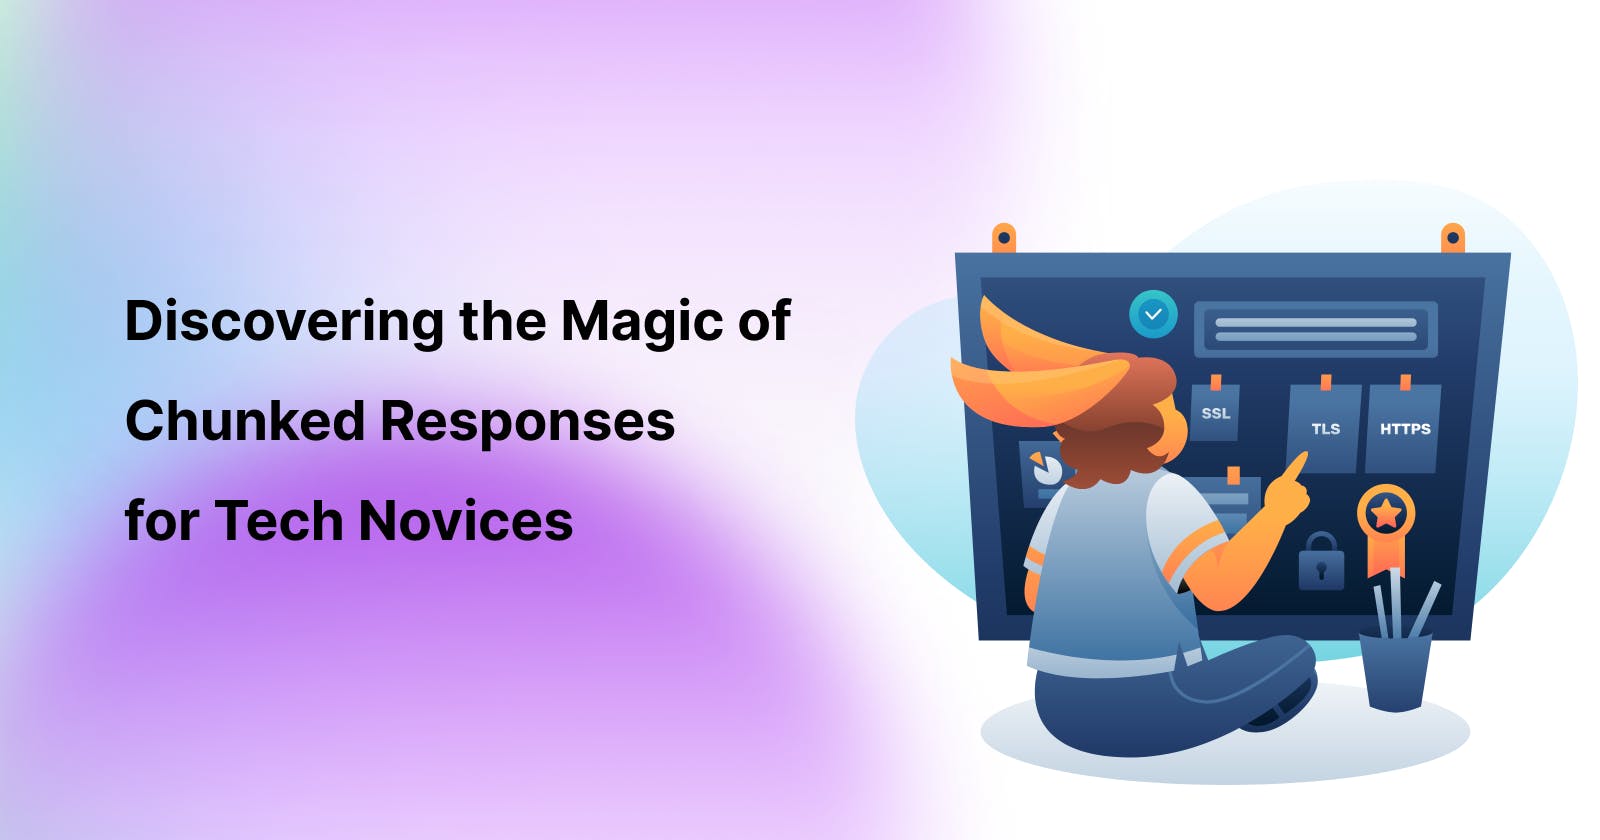 Journey into the Unknown: Discovering the Magic of Chunked Responses for Tech Novices